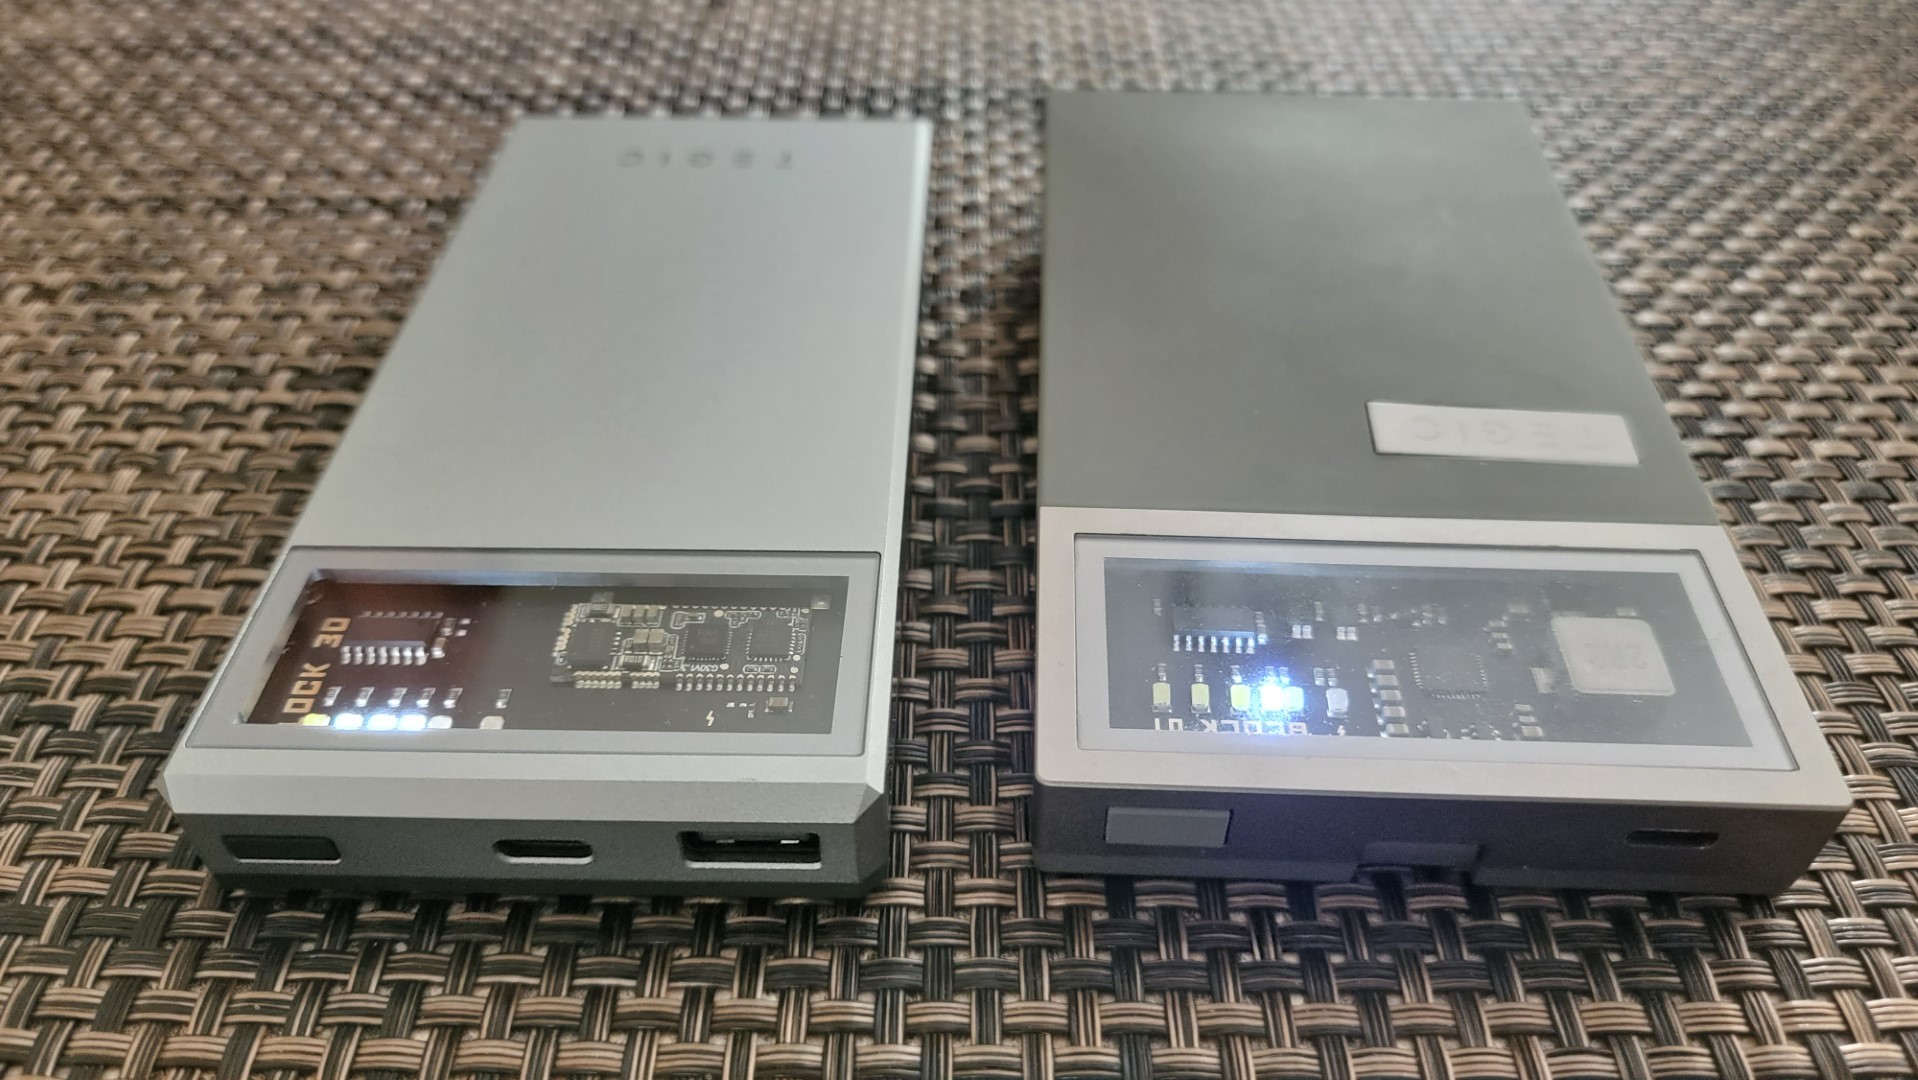 TEGIC Block 30 compared with the TEGIC Block 01 Ports with LEDs turned on - Front